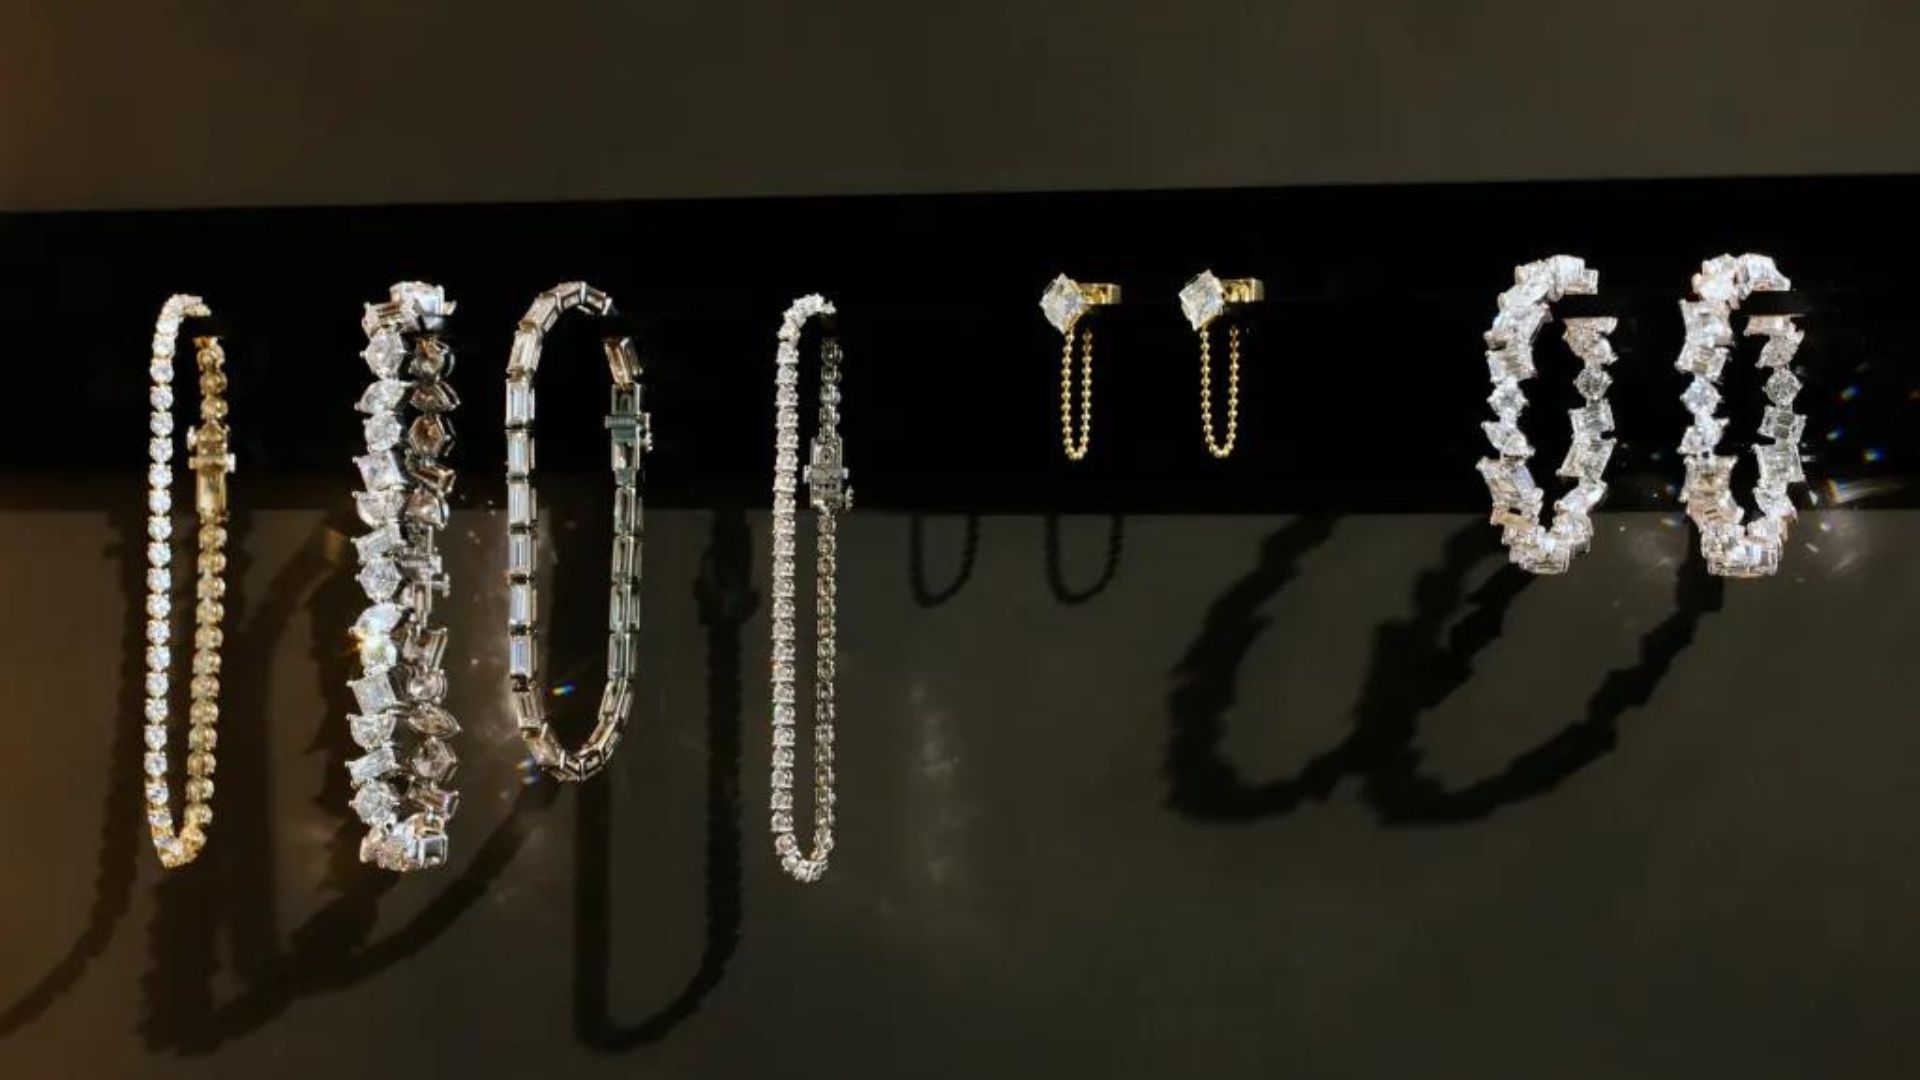 this image shows one of the Jewellery Brands Worn by Celebrities